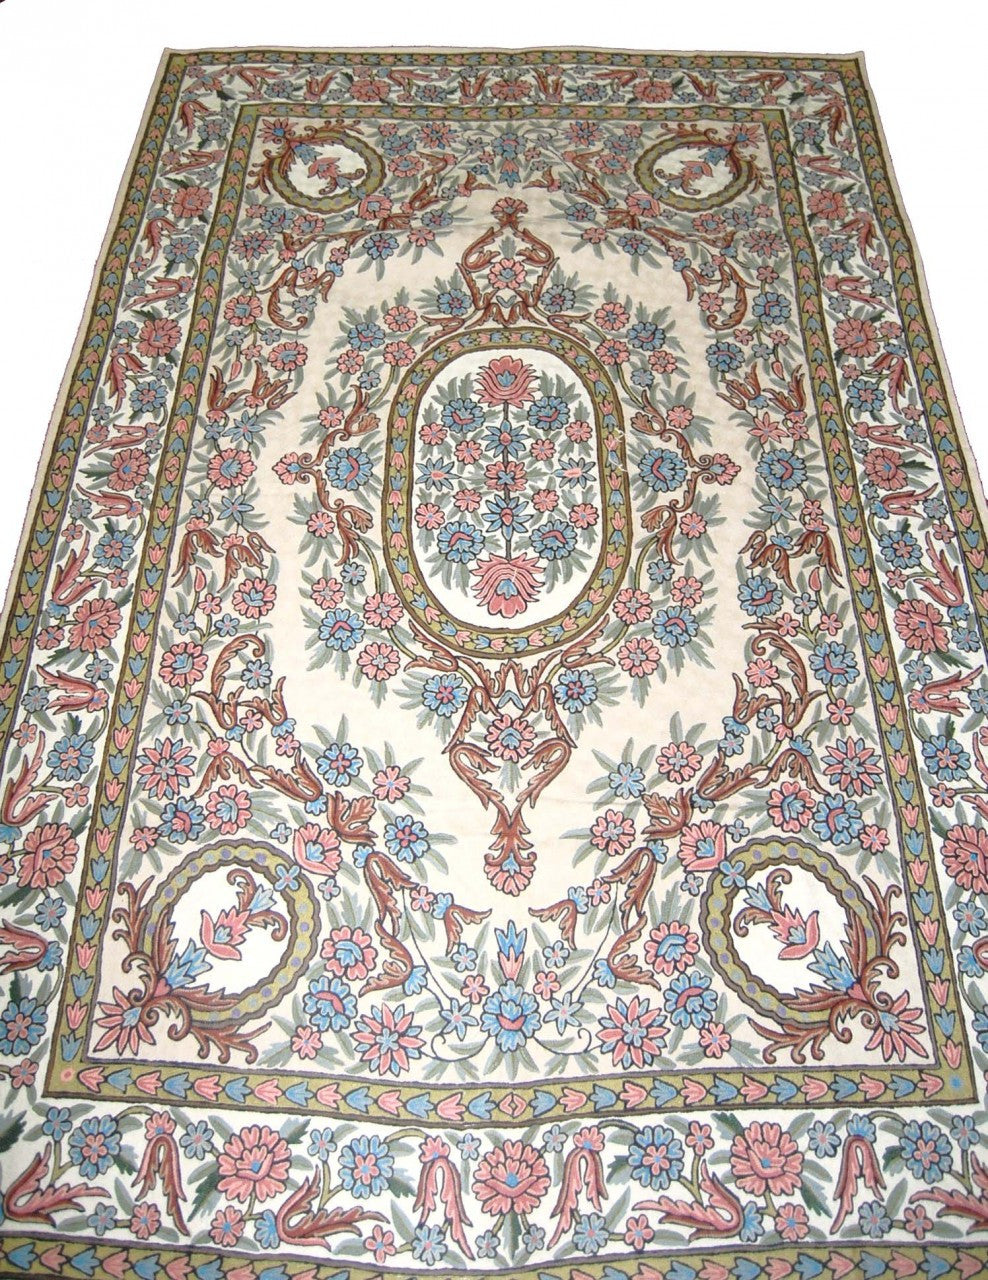 ChainStitch Tapestry Woolen Area Rug, Multicolor Embroidery 6x9 feet #CWR54101